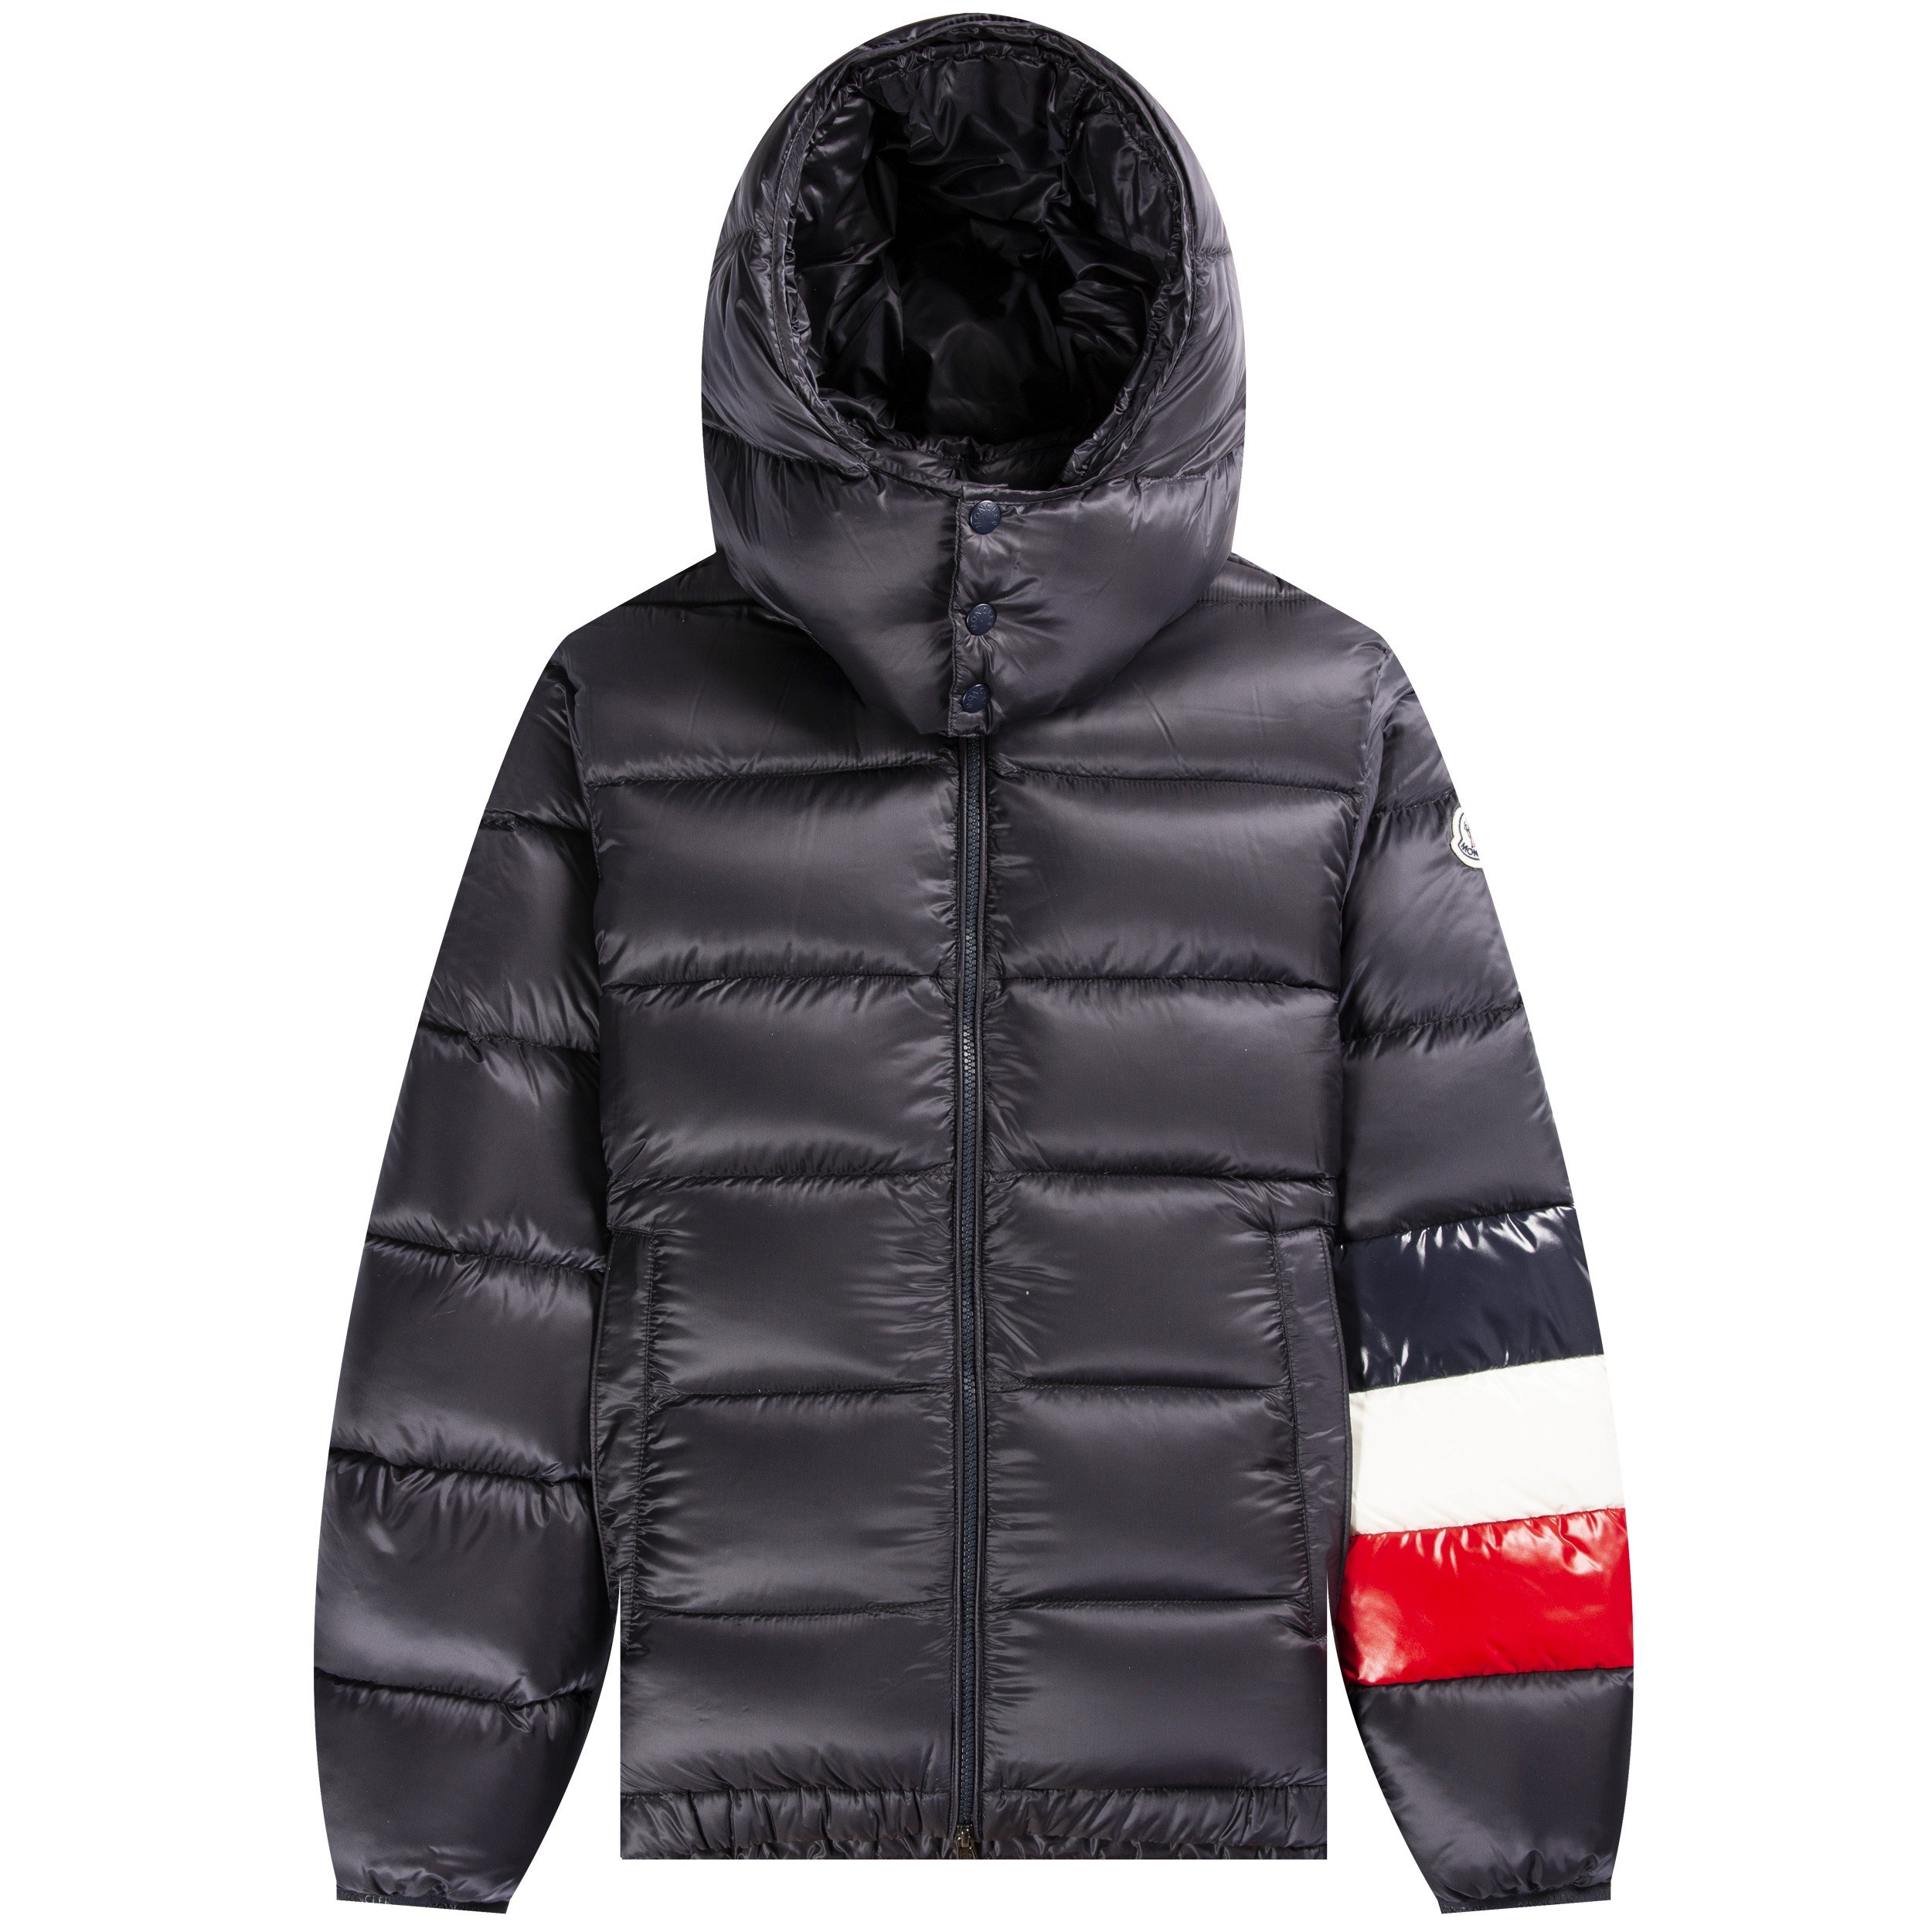 Moncler 'Willm' Hooded Jacket Navy